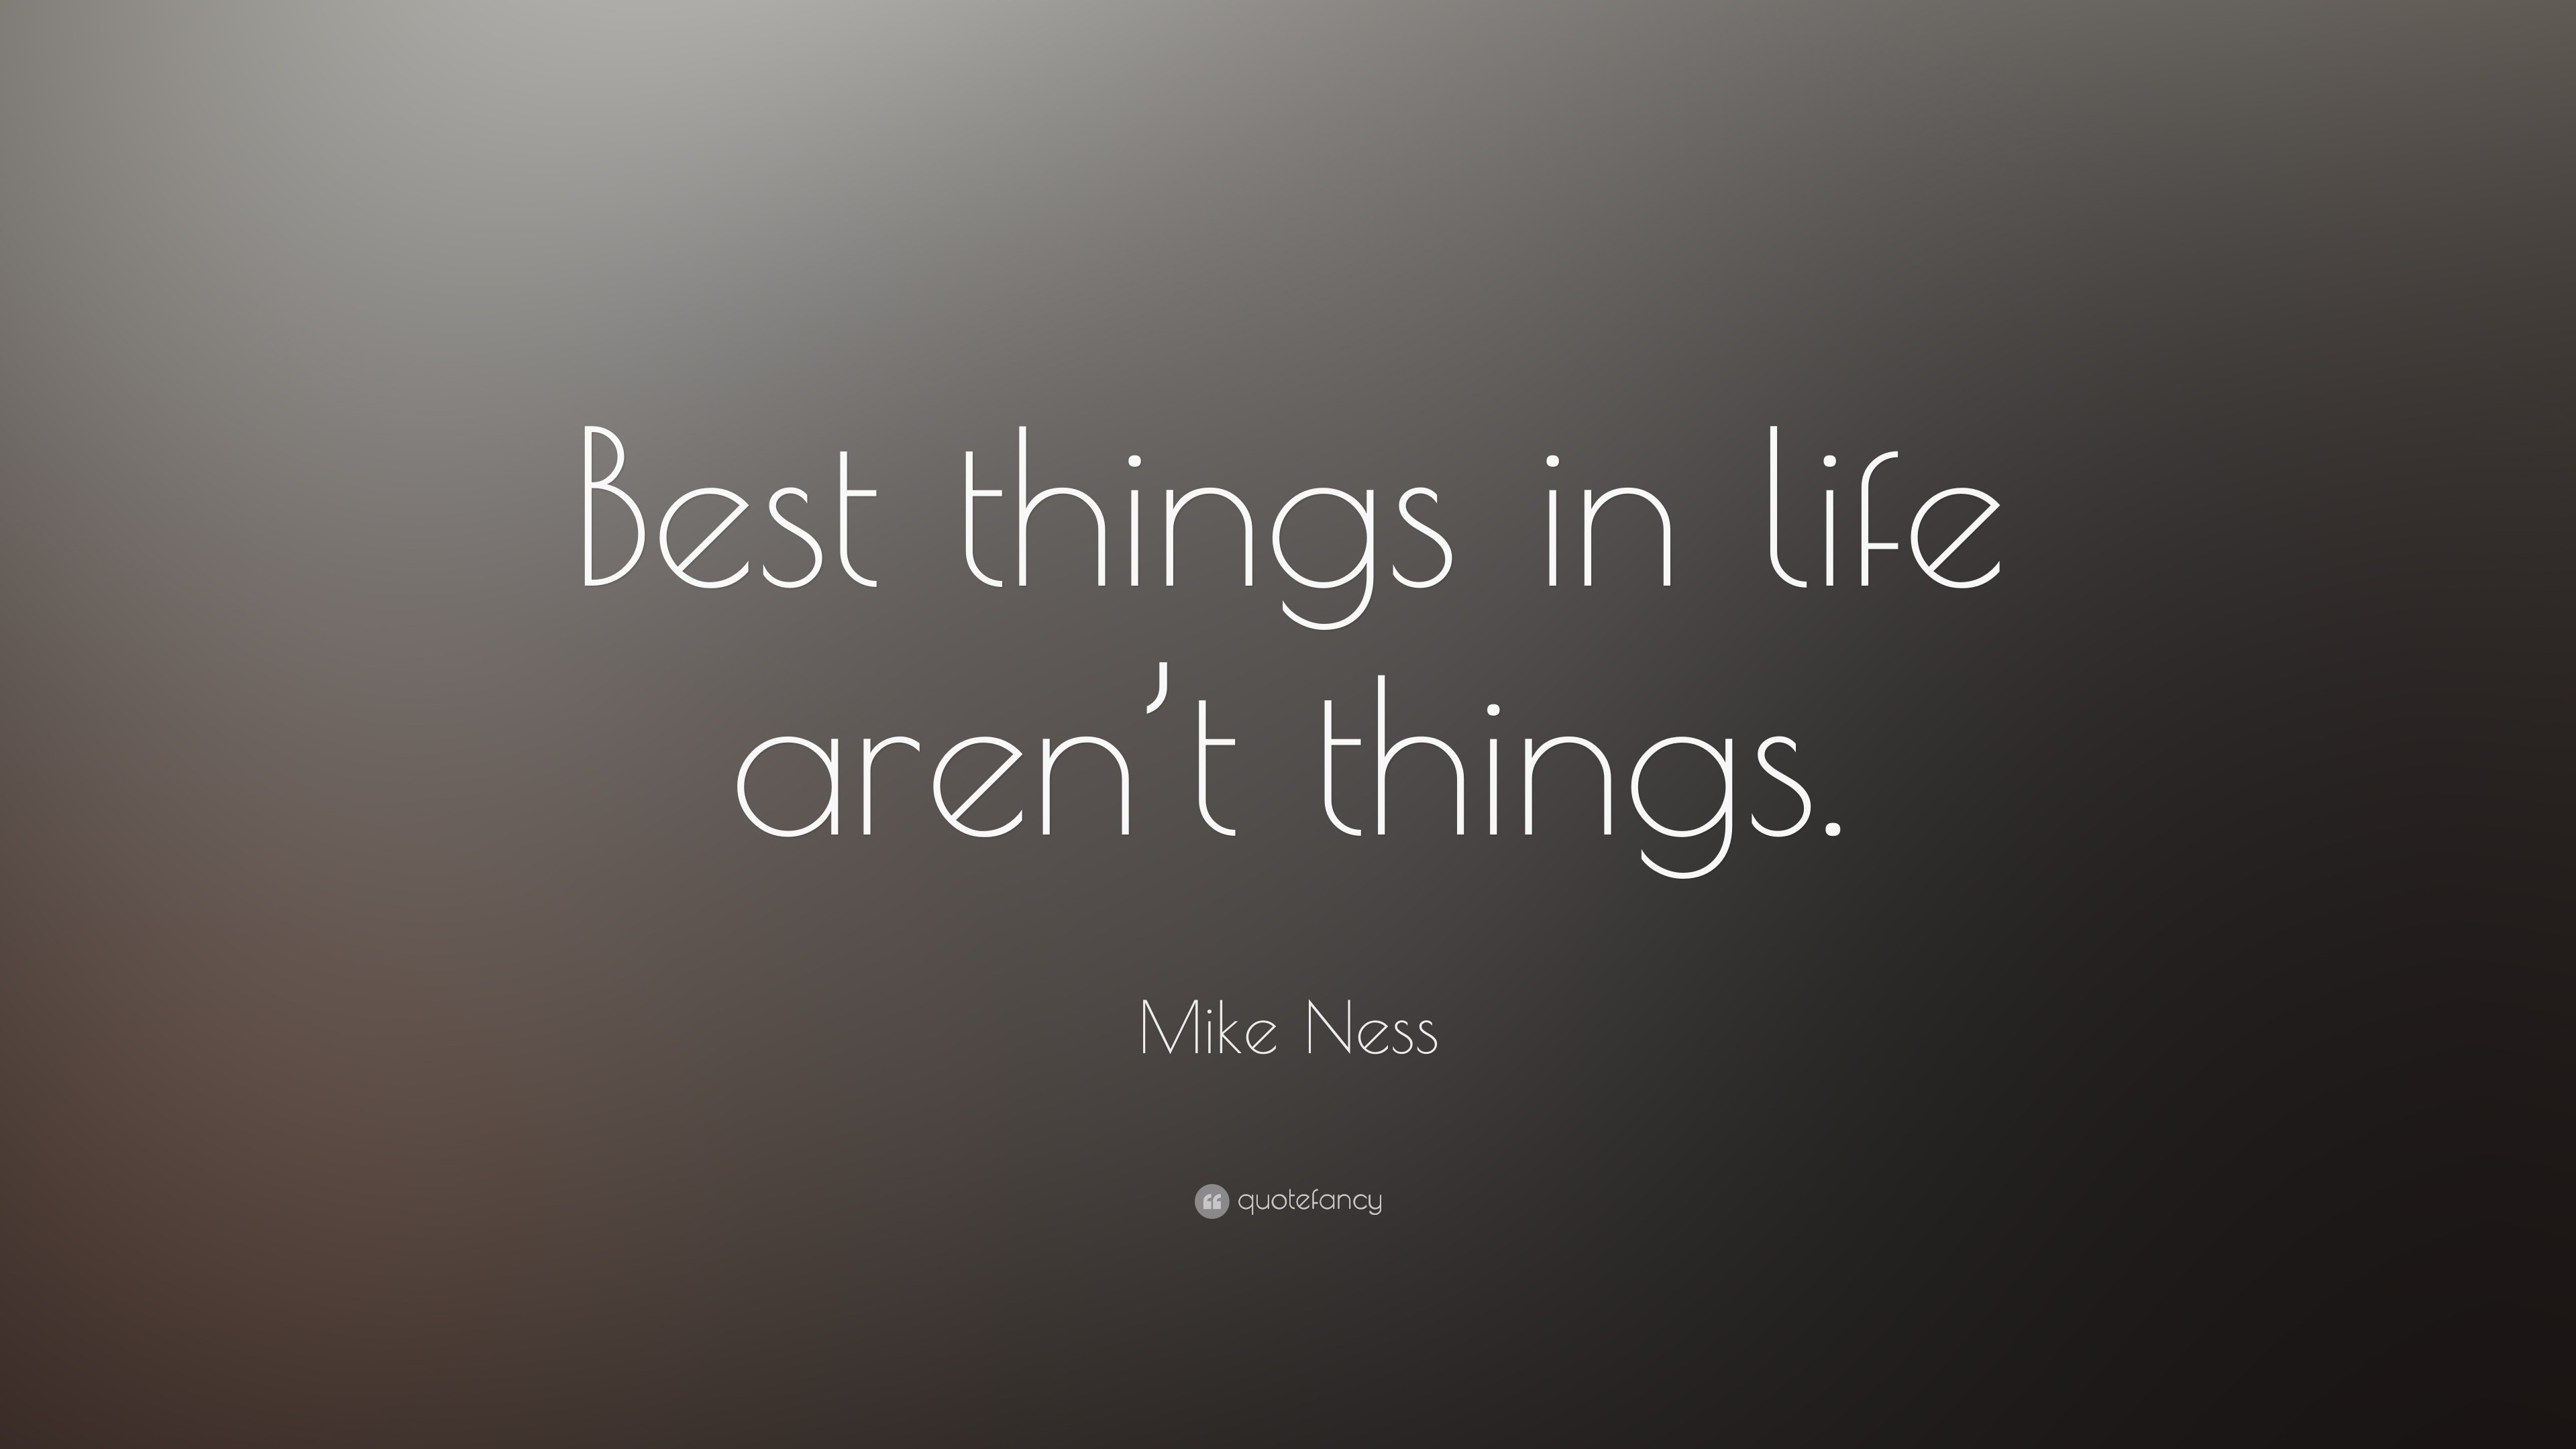 Mike Ness Quote “Best things in life aren t things ”